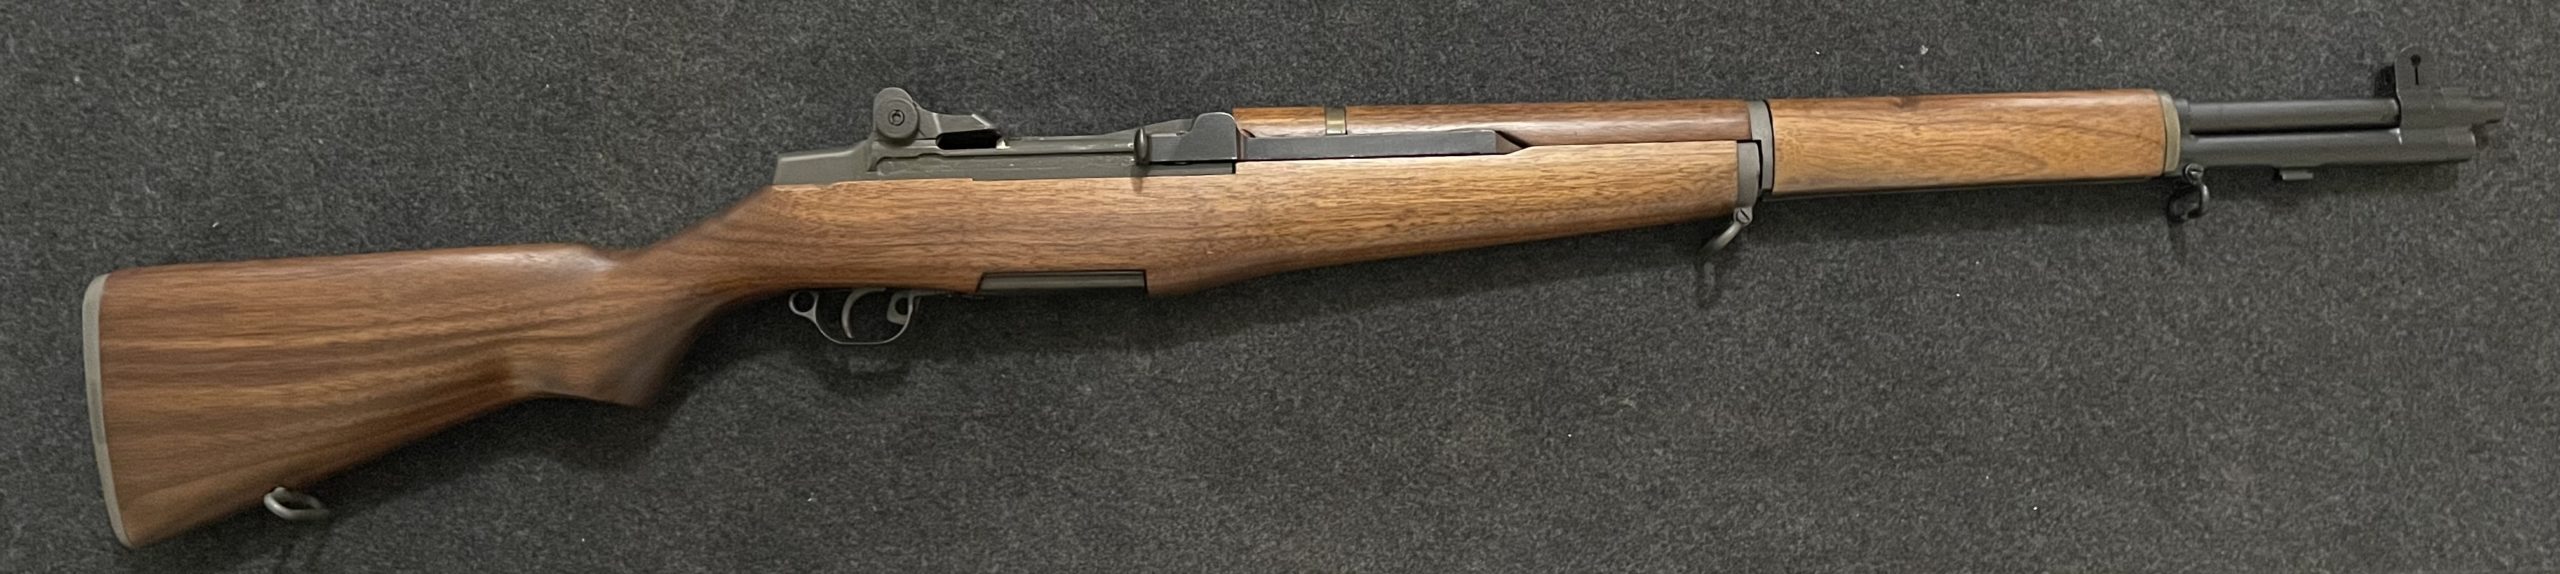 My CMP Expert Grade M1 Garand that I finished completely with boiled linseed oil